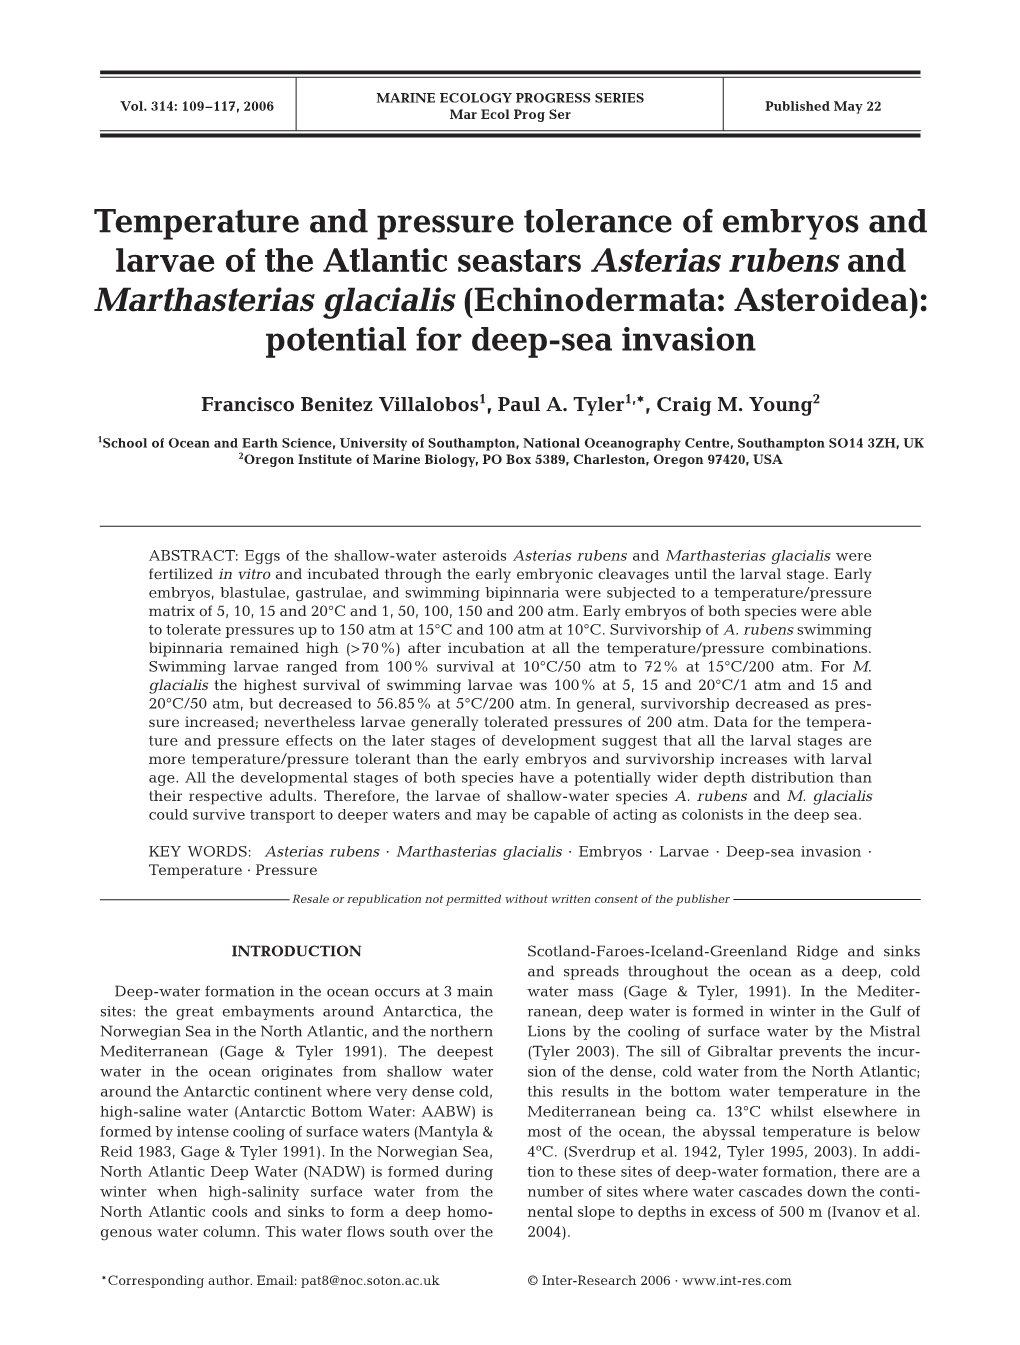 Temperature and Pressure Tolerance of Embryos and Larvae of The